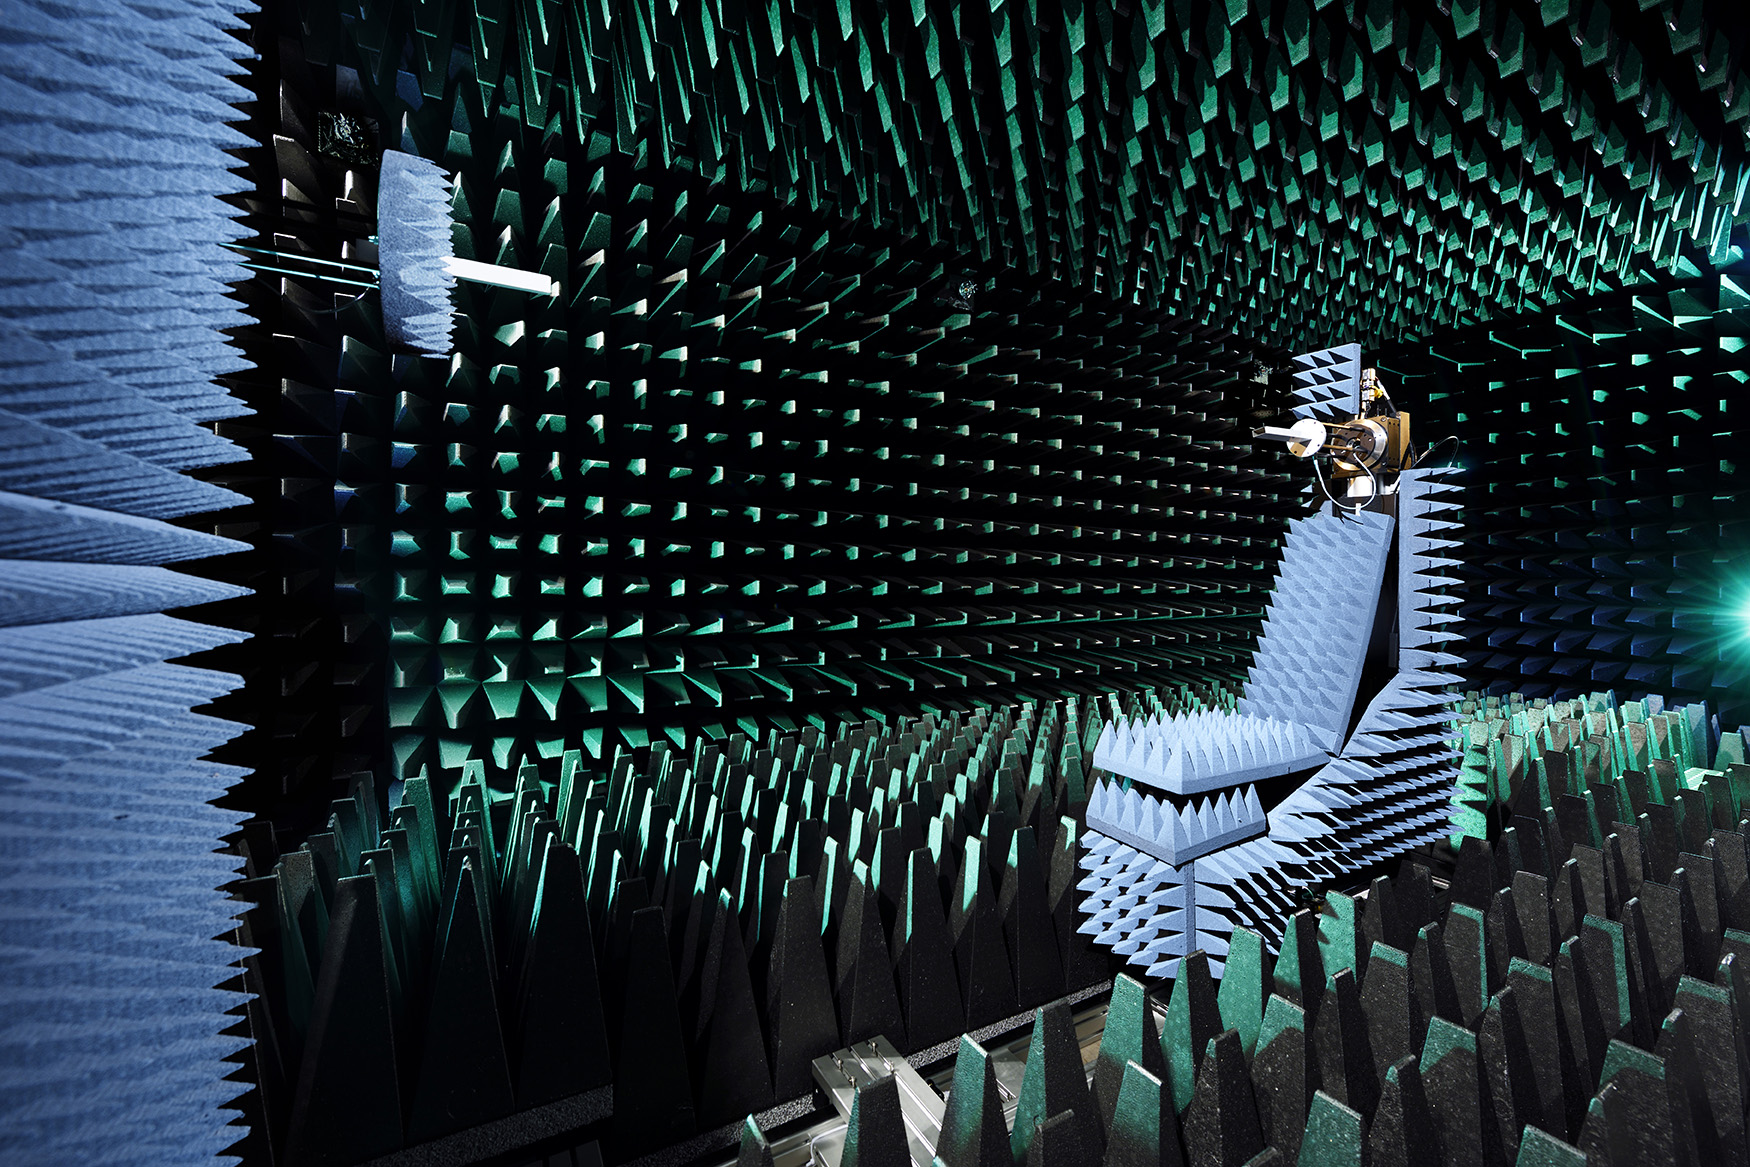 Anechoic chamber of the Centre for Wireless Technology, Eindhoven University of Technology